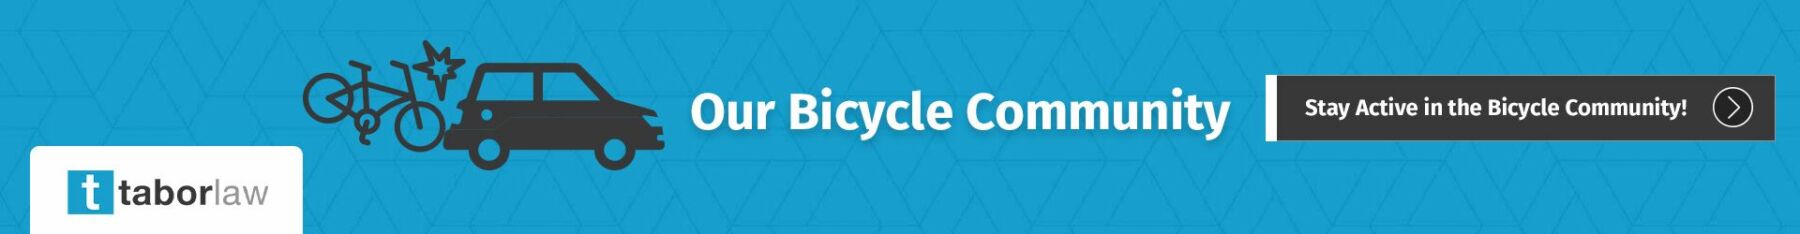 Click here to visit our Bicycle Community page